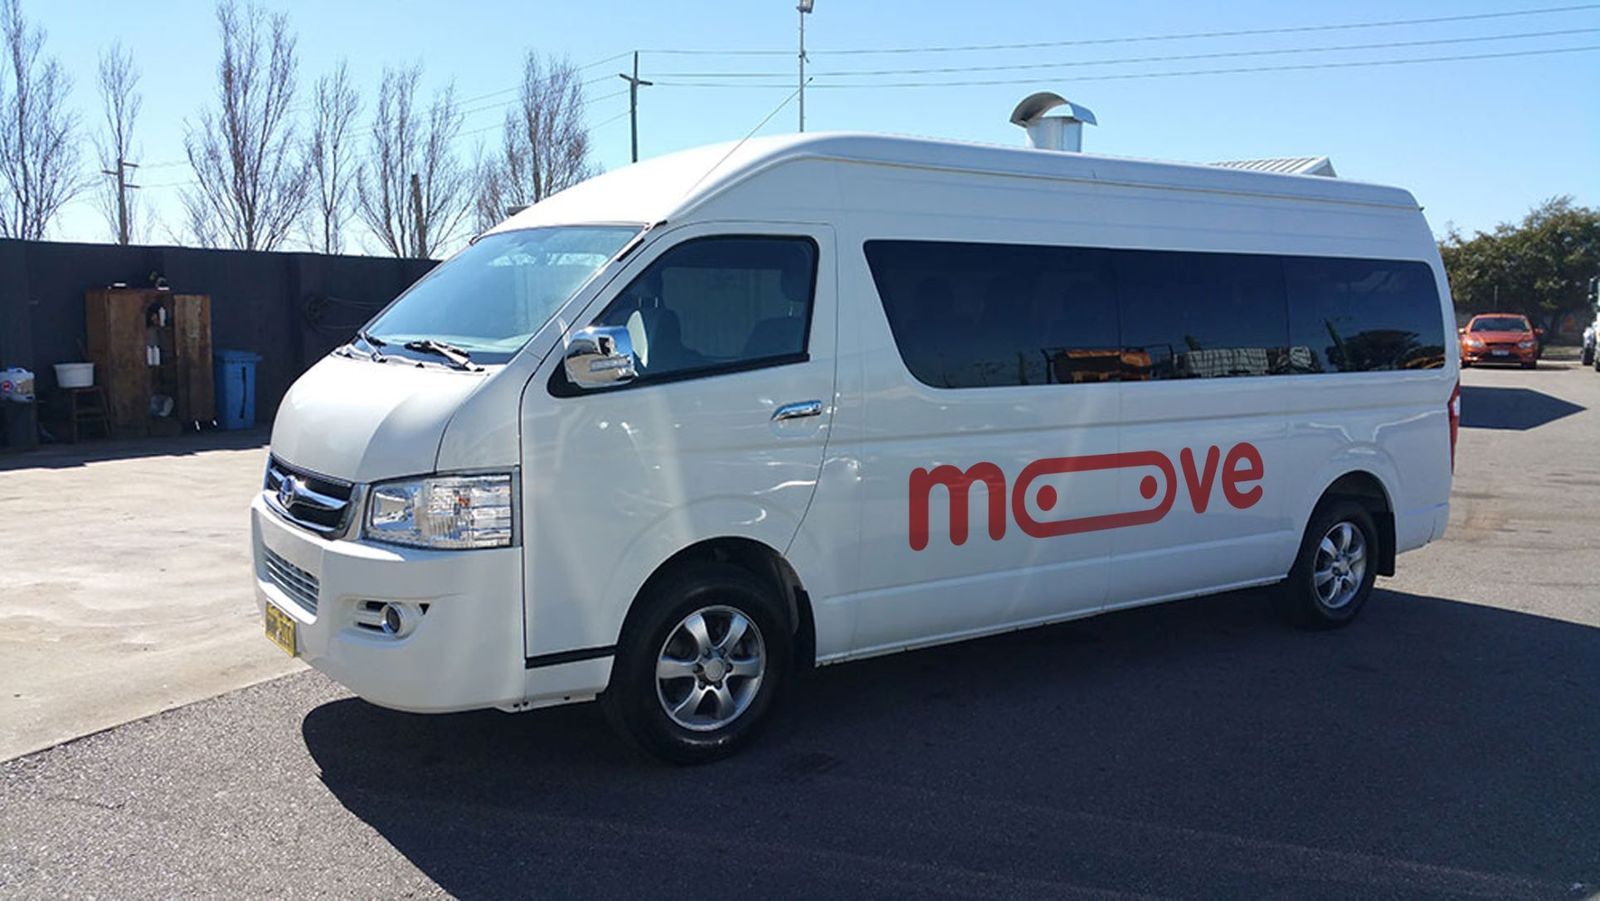 Nigeria's Moove has partnered with Swvl for electric buses.